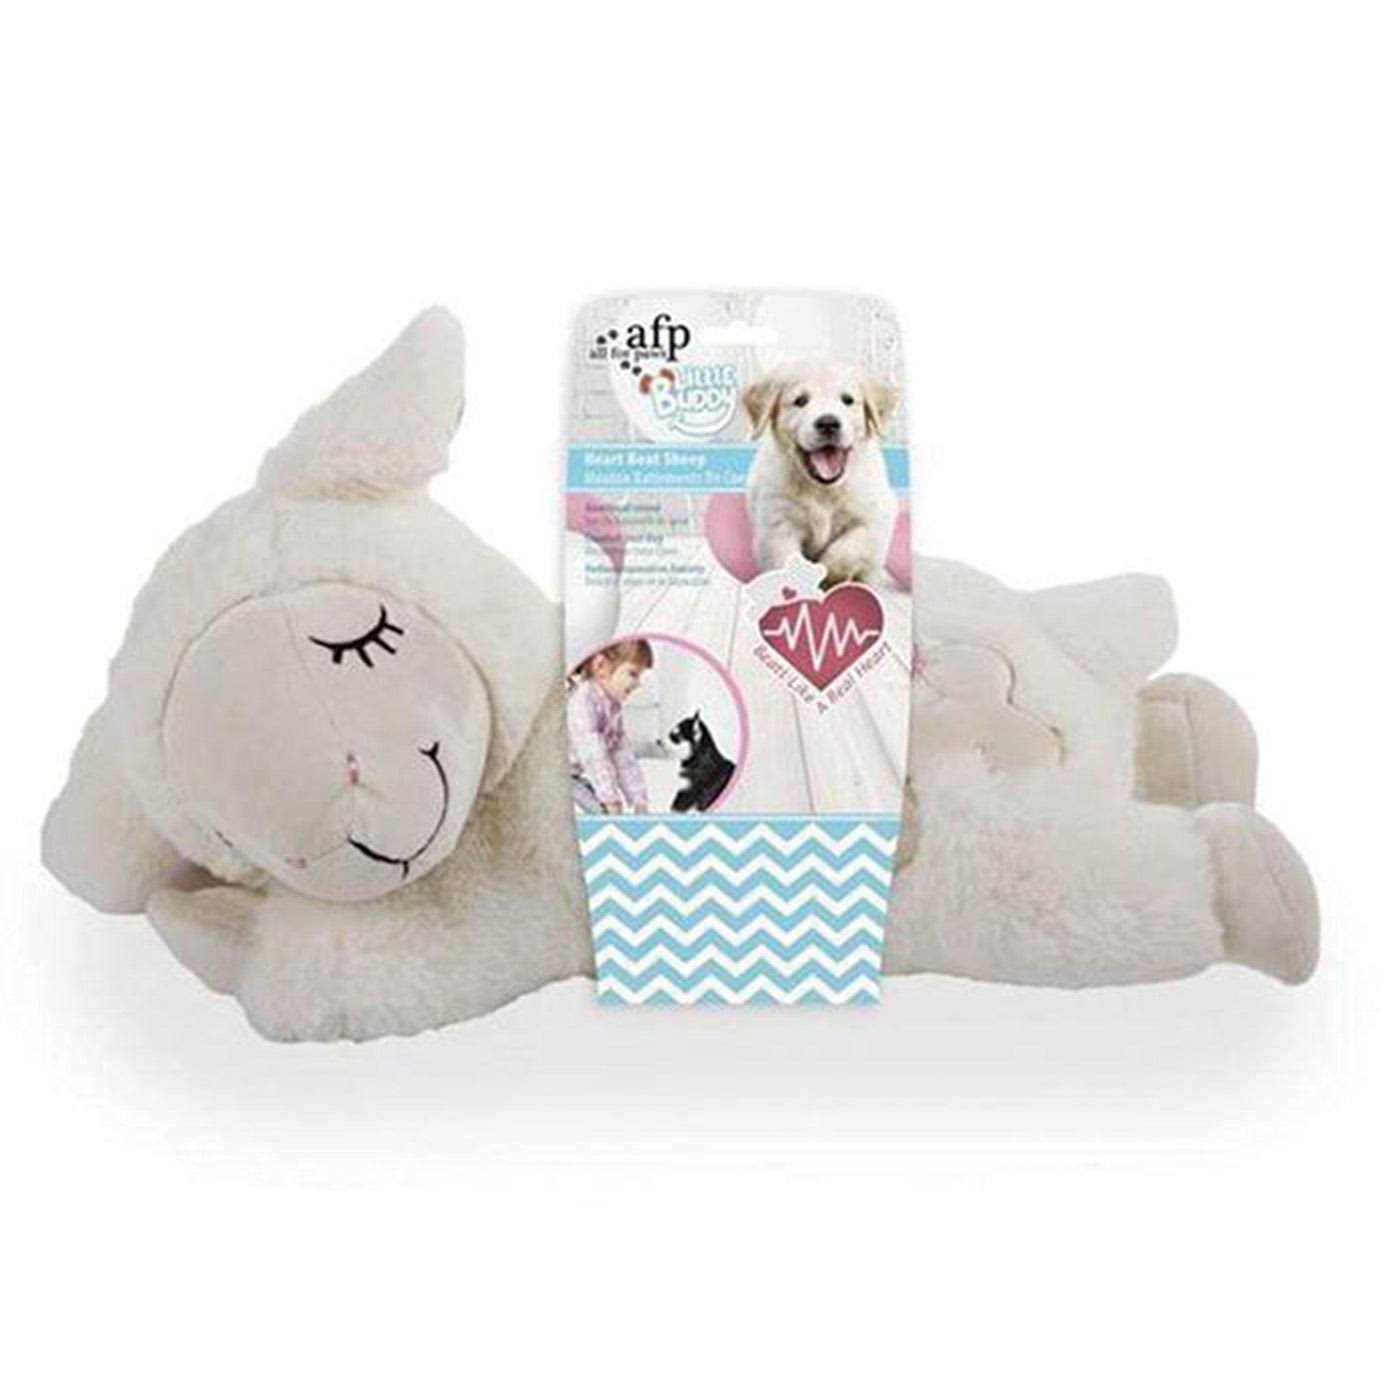 All for Paws Little Buddy Heart Beat Sheep Dog Toy - 38cm x 23cm x 18cm